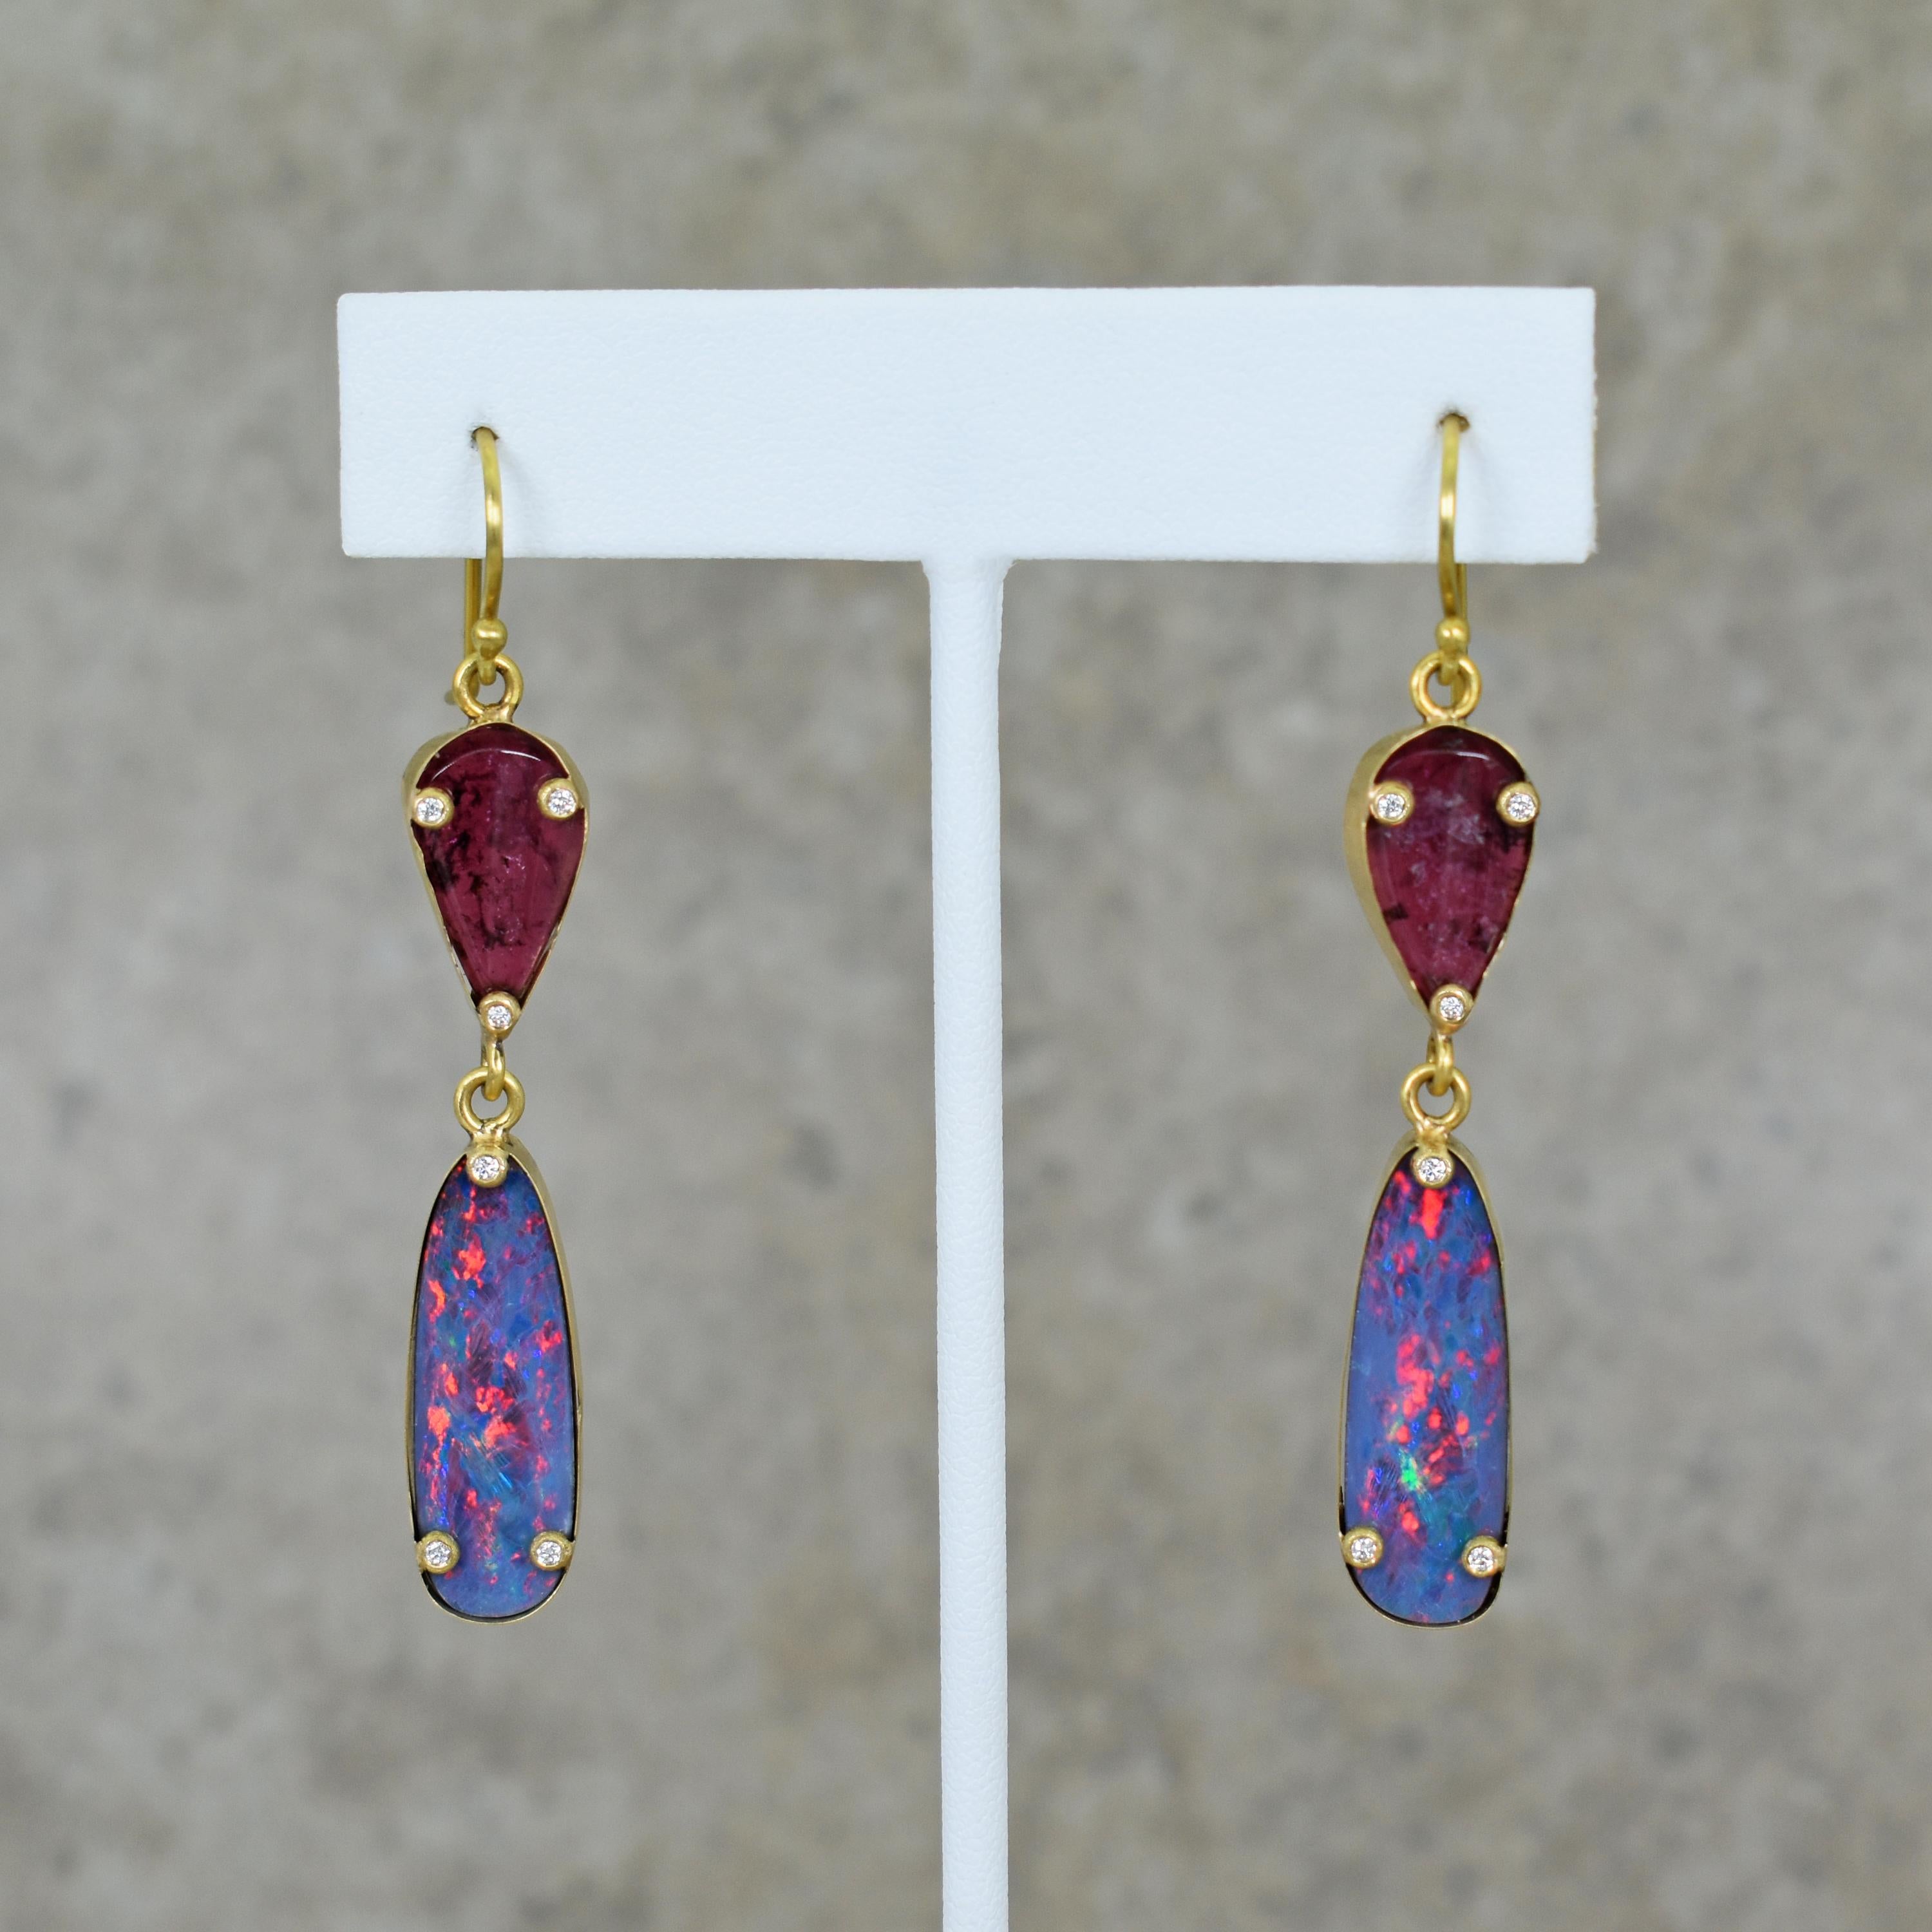 Russian Pink Tourmaline, Australian Boulder Opal and accent white Diamond (0.18 total carats, G-H, SI1) 18k yellow gold dangle earrings. Dangle earrings are 2.5 inches in length. Gorgeous Tourmaline and Opal gemstones in these contemporary earrings.